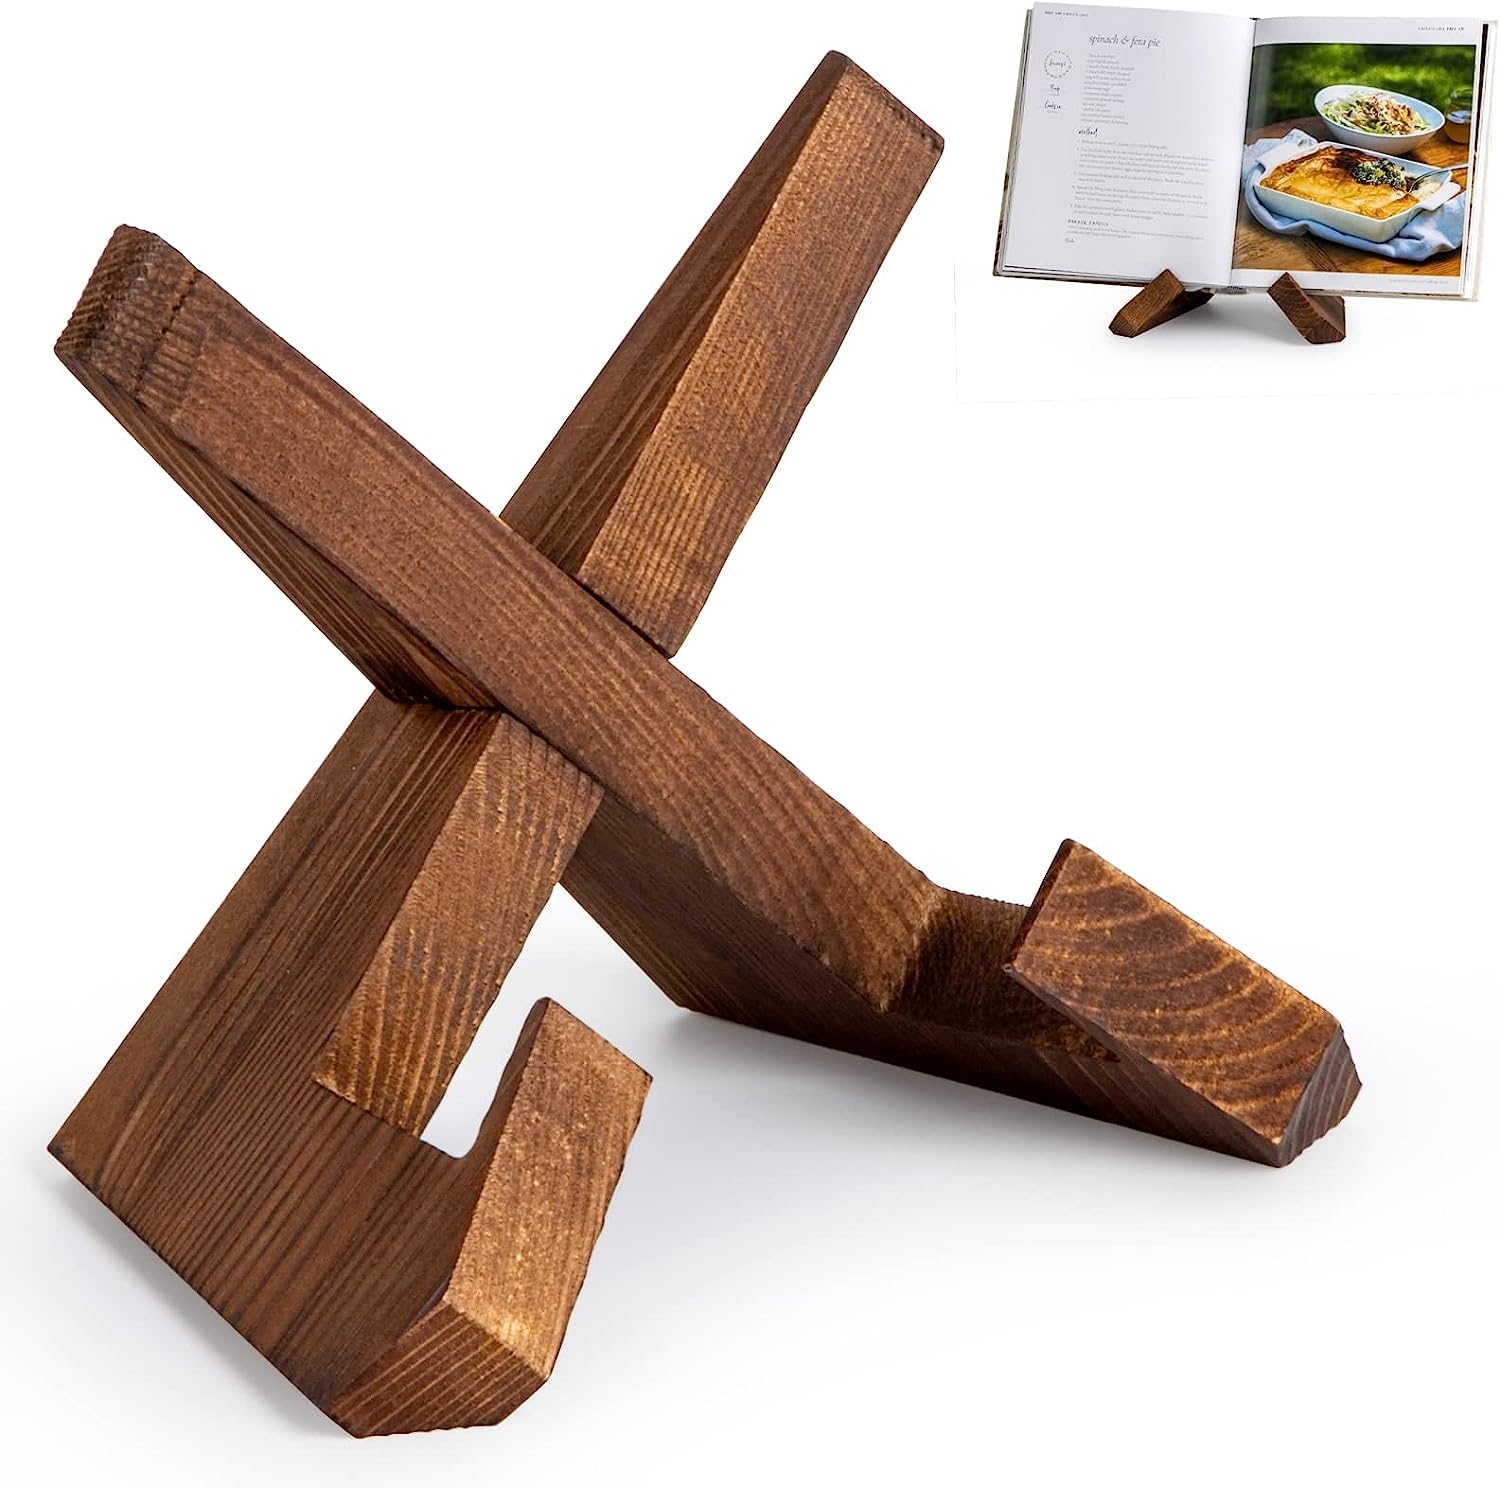 A Wooden Book Stand